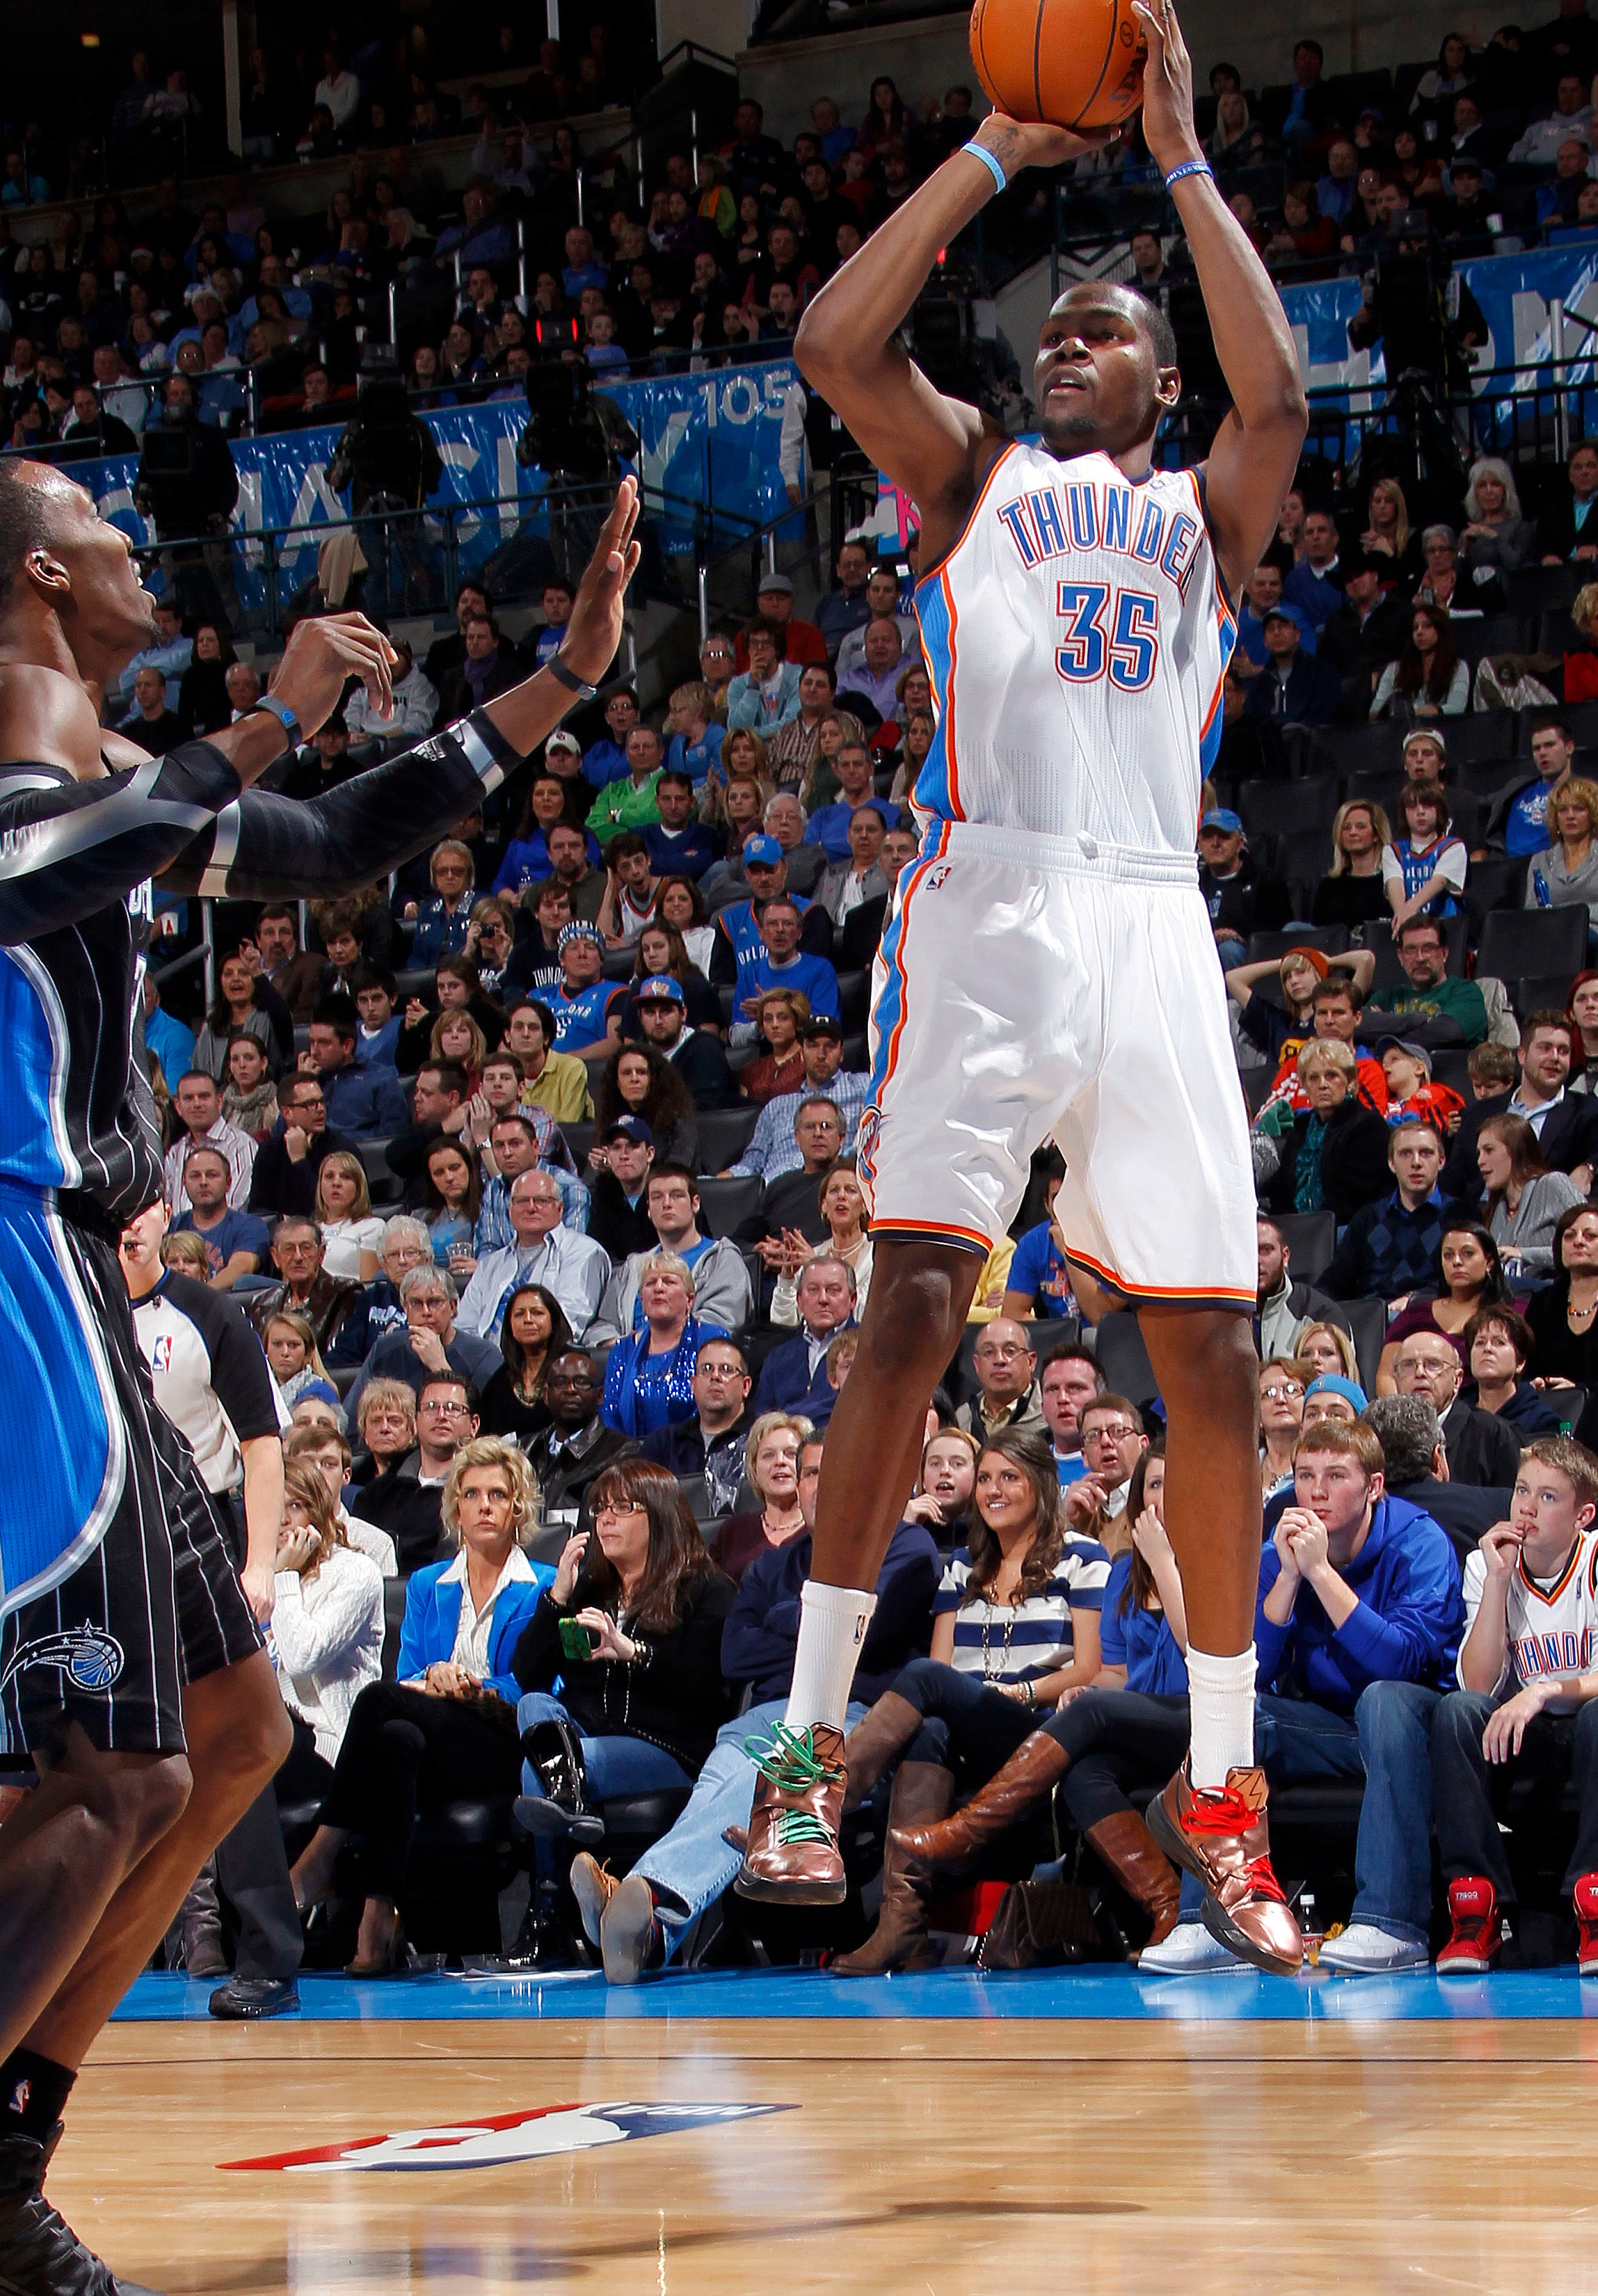 Kevin Durant #35 of the Oklahoma City Thunder shoots over Dwight Howard #12 of the Orlando Magic during an NBA game on December 25, 2011 at the Chesapeake Energy Arena in Oklahoma City, Oklahoma.